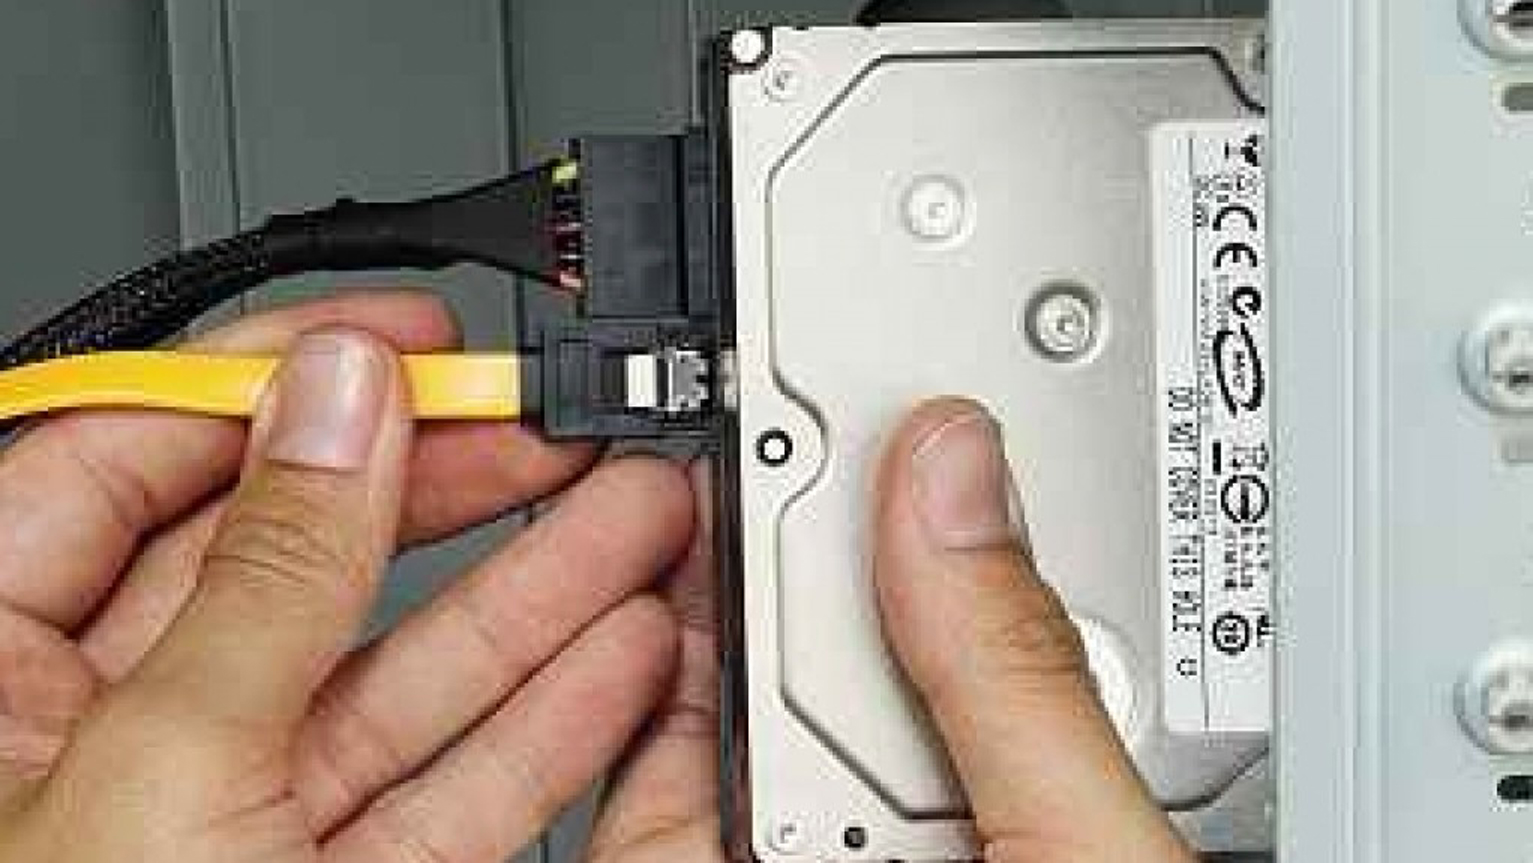 craft Forfalske Præstation How to Install a New Hard Drive or SSD Drive on a PC